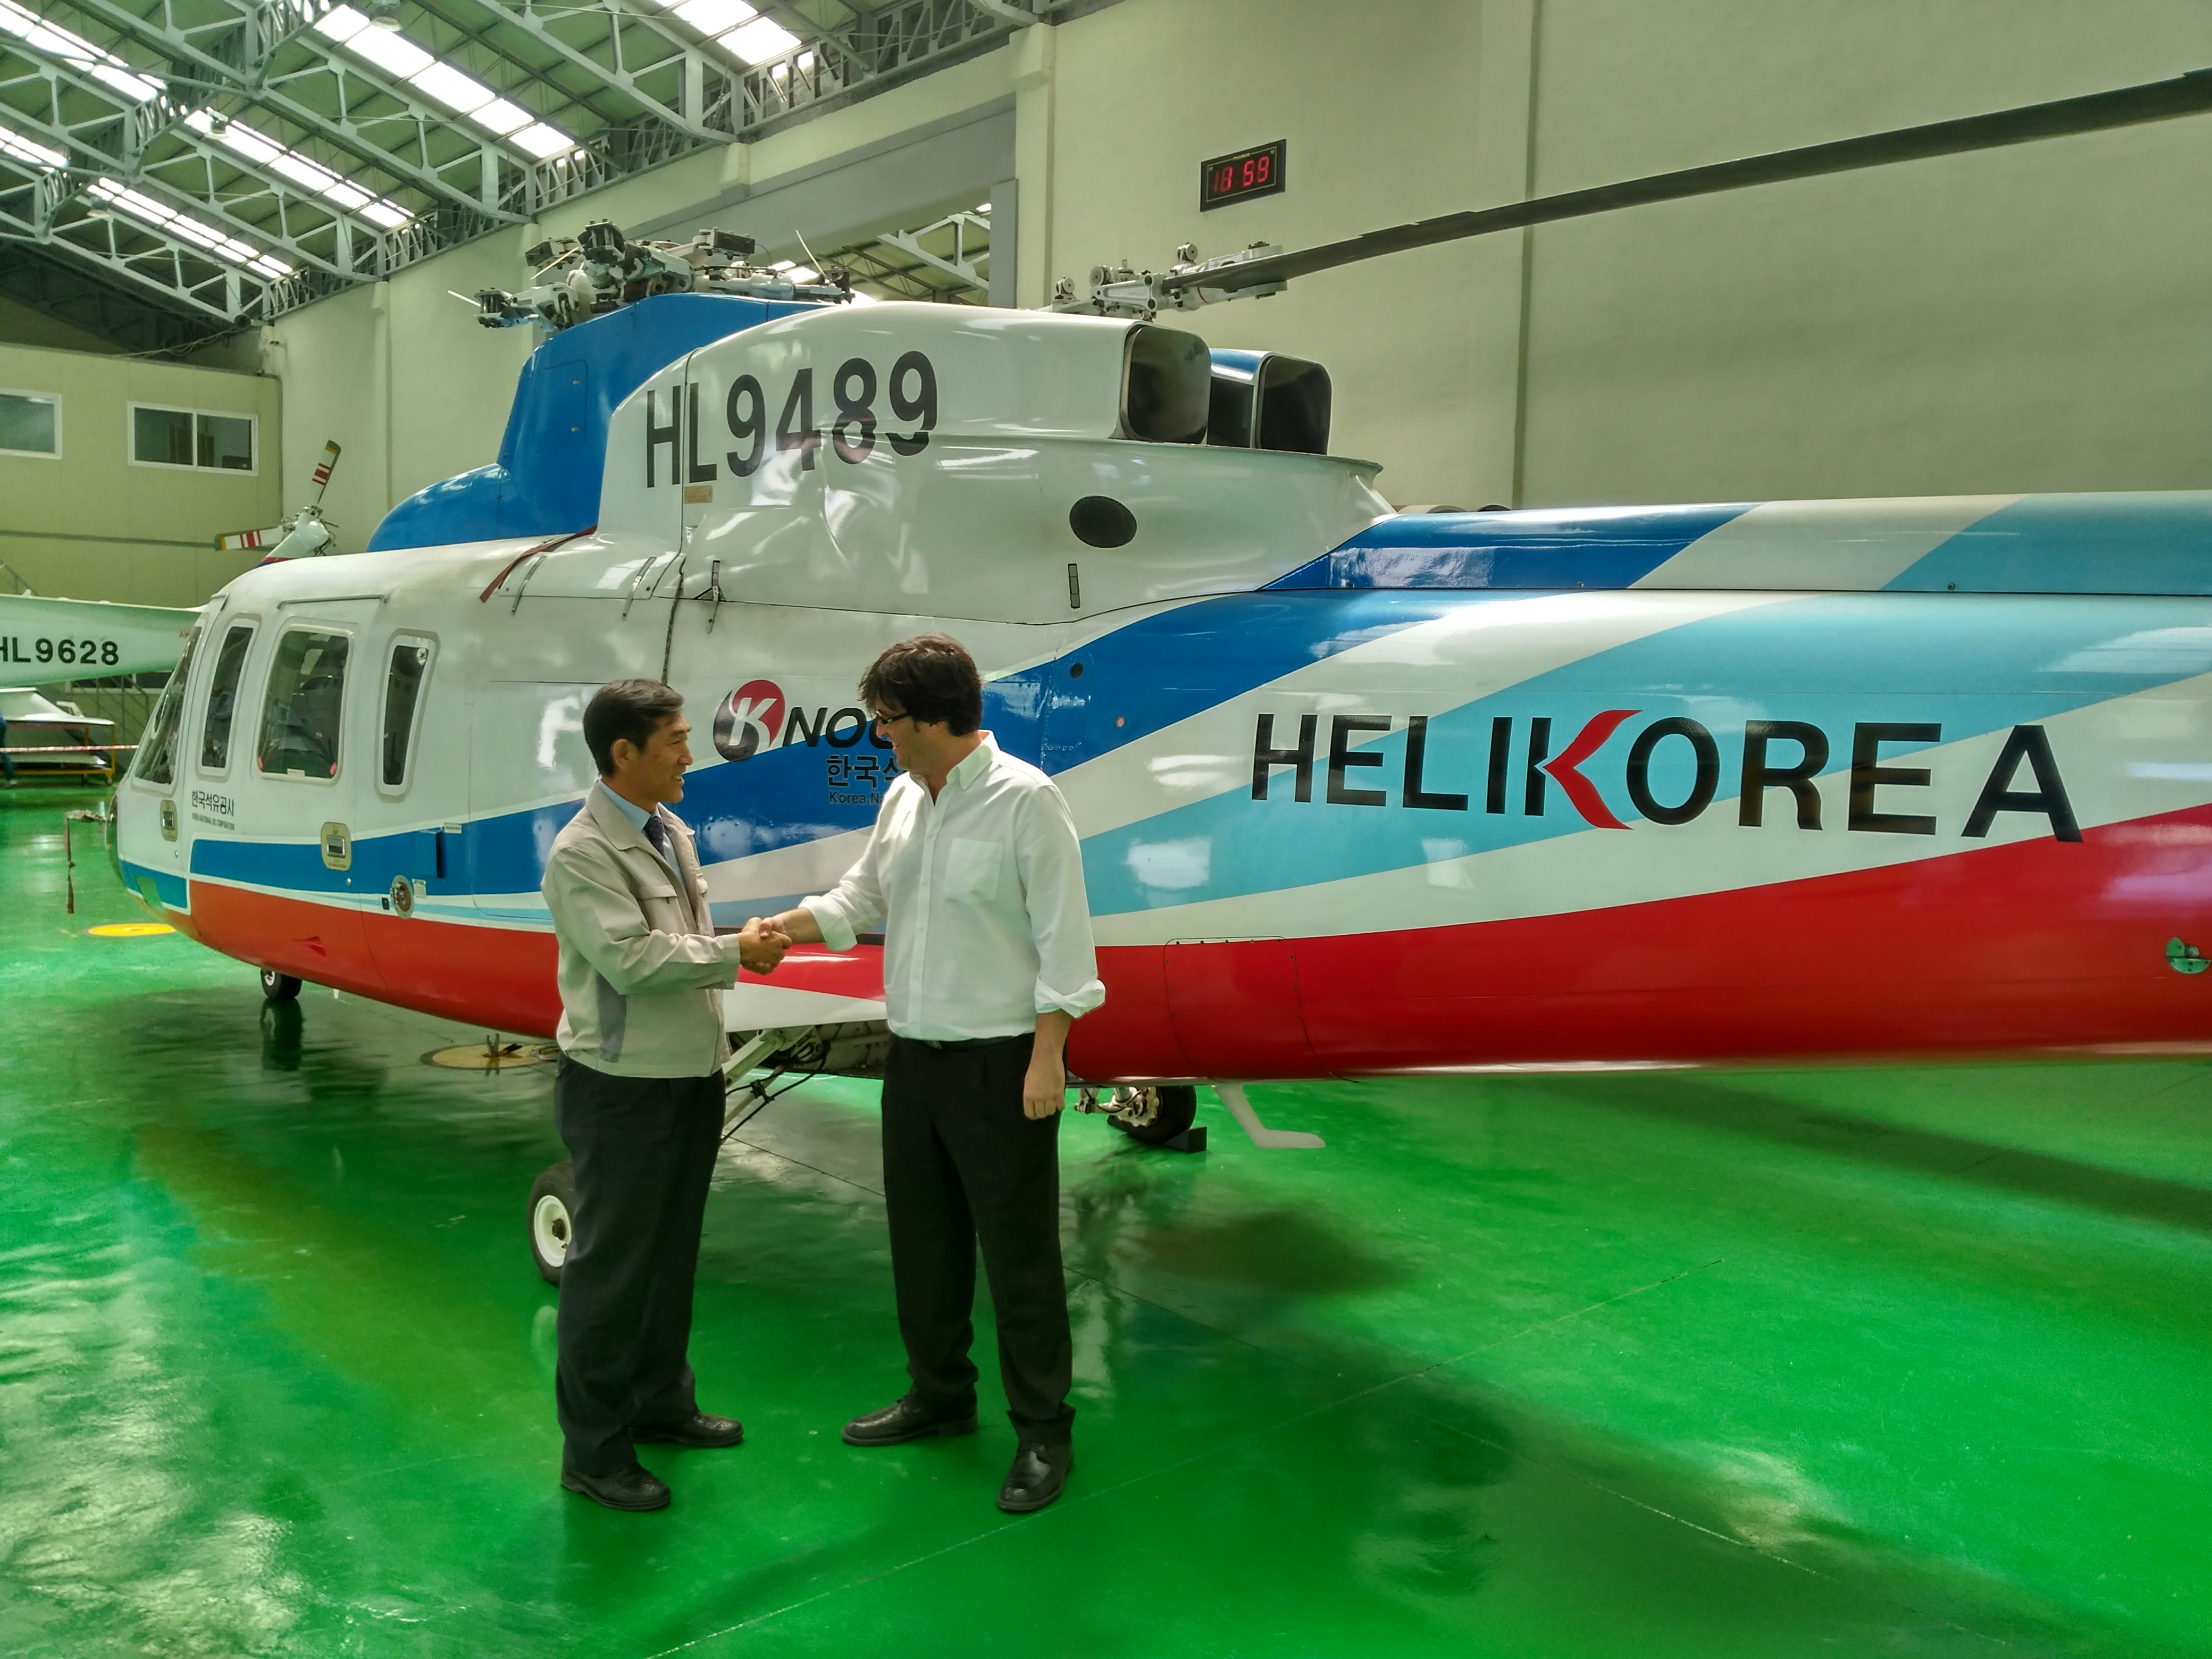 Entrol collaborates with Helikorea to provide an FTD that will adequately train Helikorea's pilots.